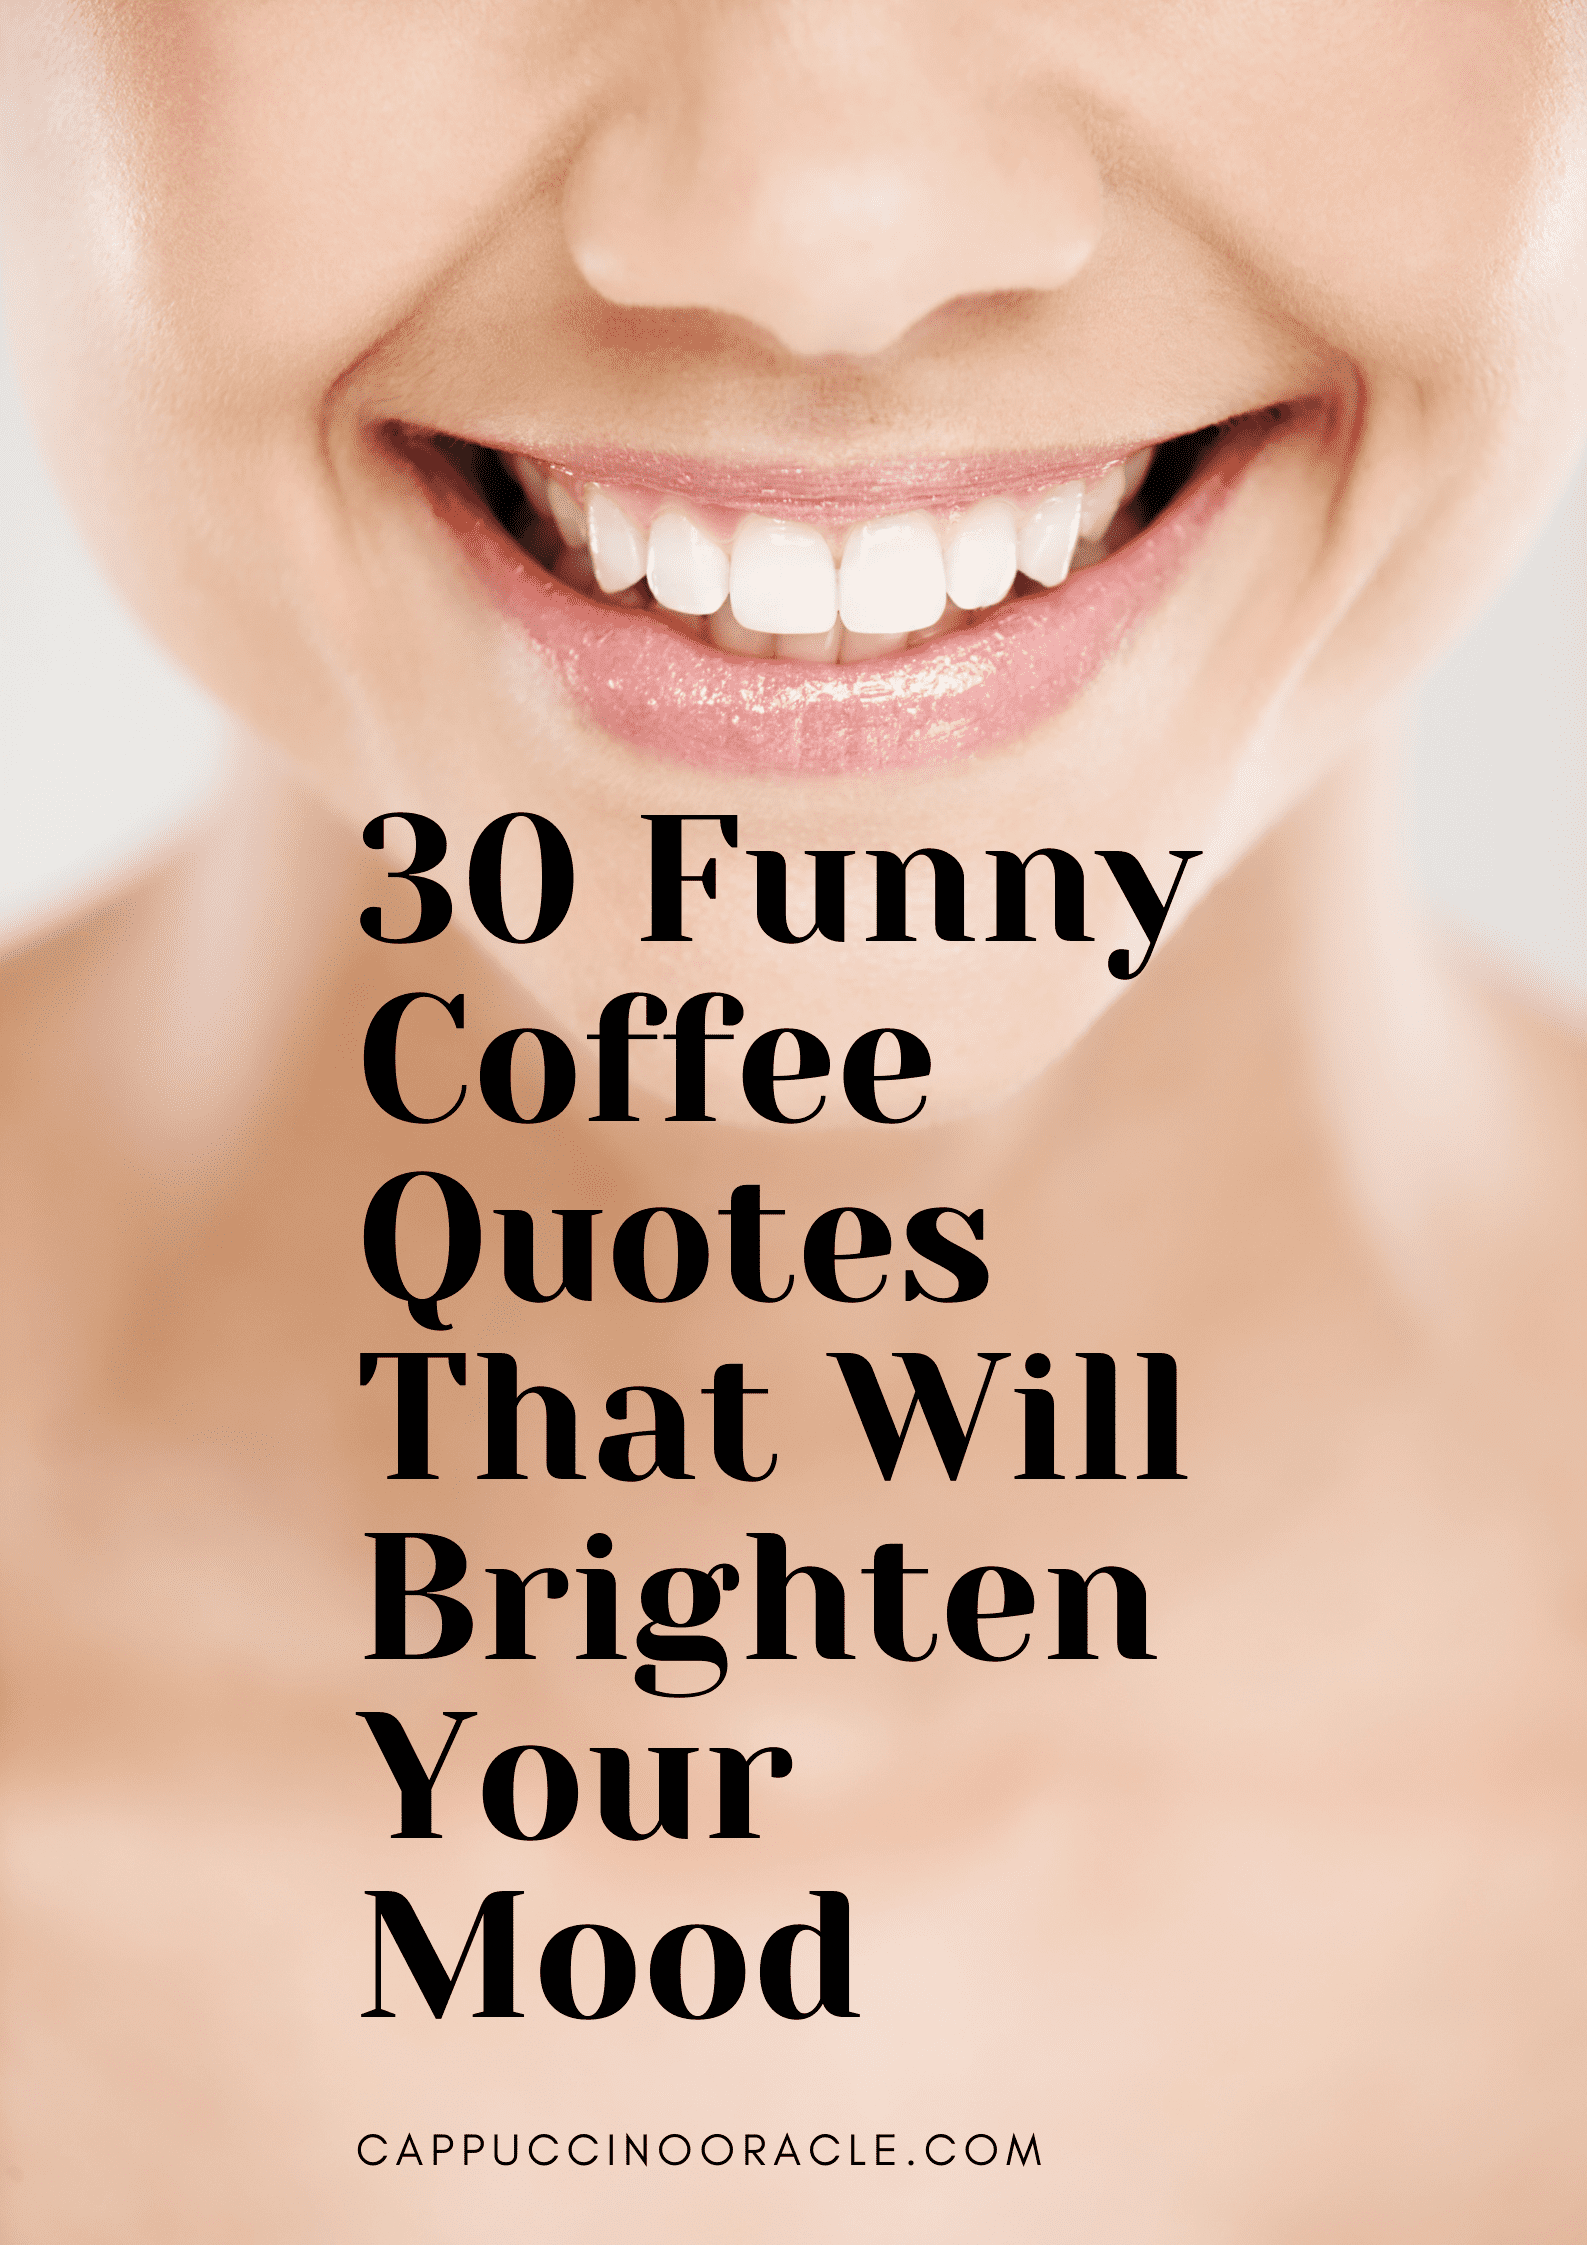 30 Funny Coffee Quotes That Will Brighten Your Mood